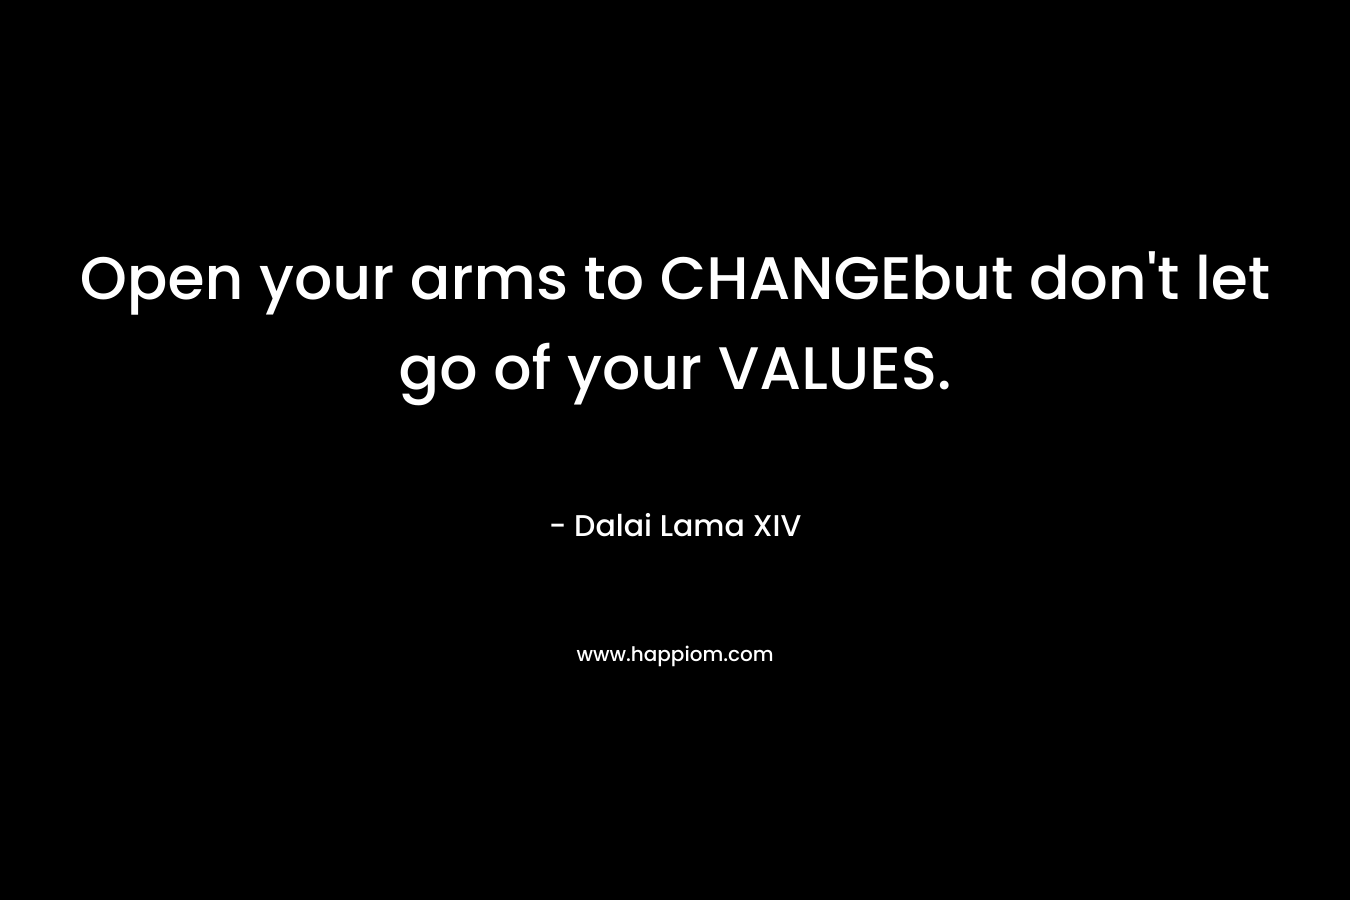 Open your arms to CHANGEbut don't let go of your VALUES.